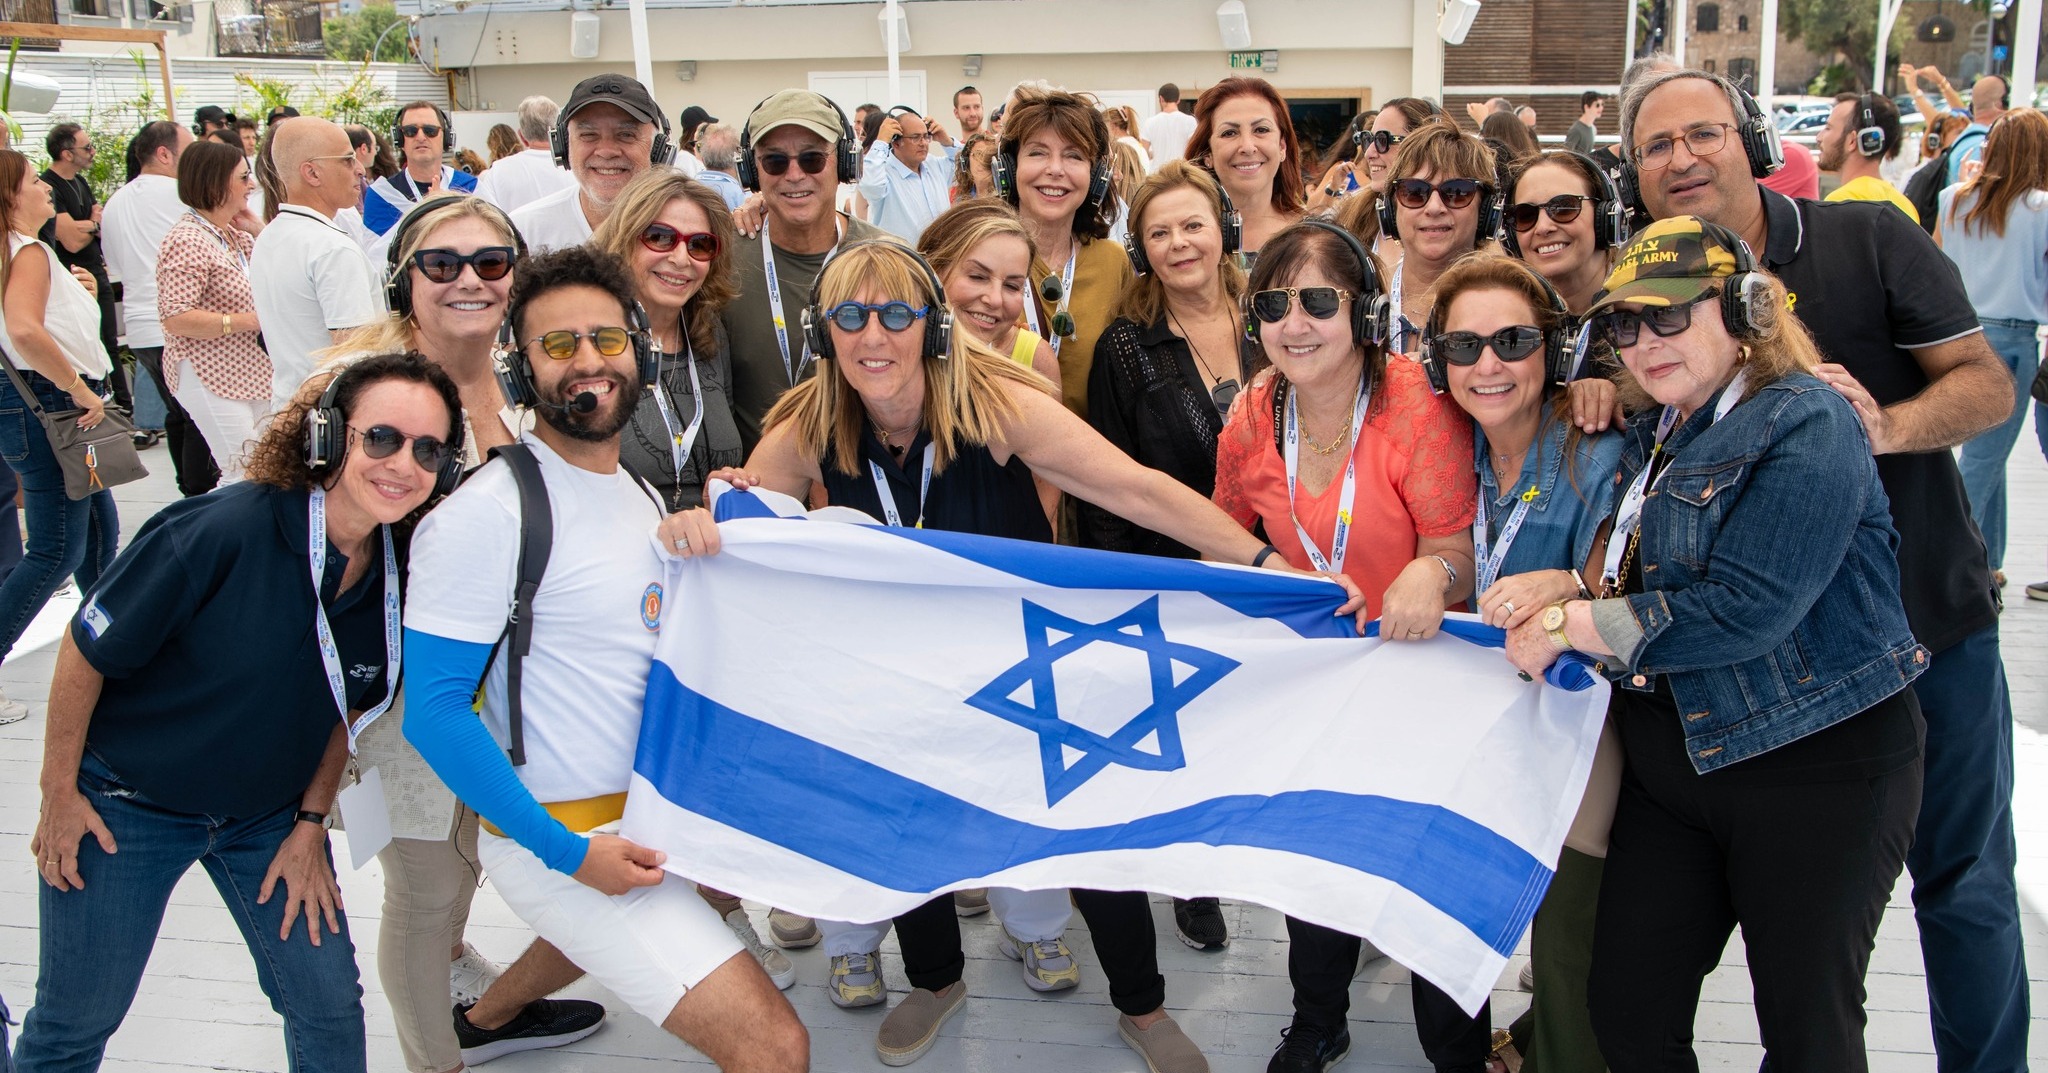 The Solidarity Mission is in Israel